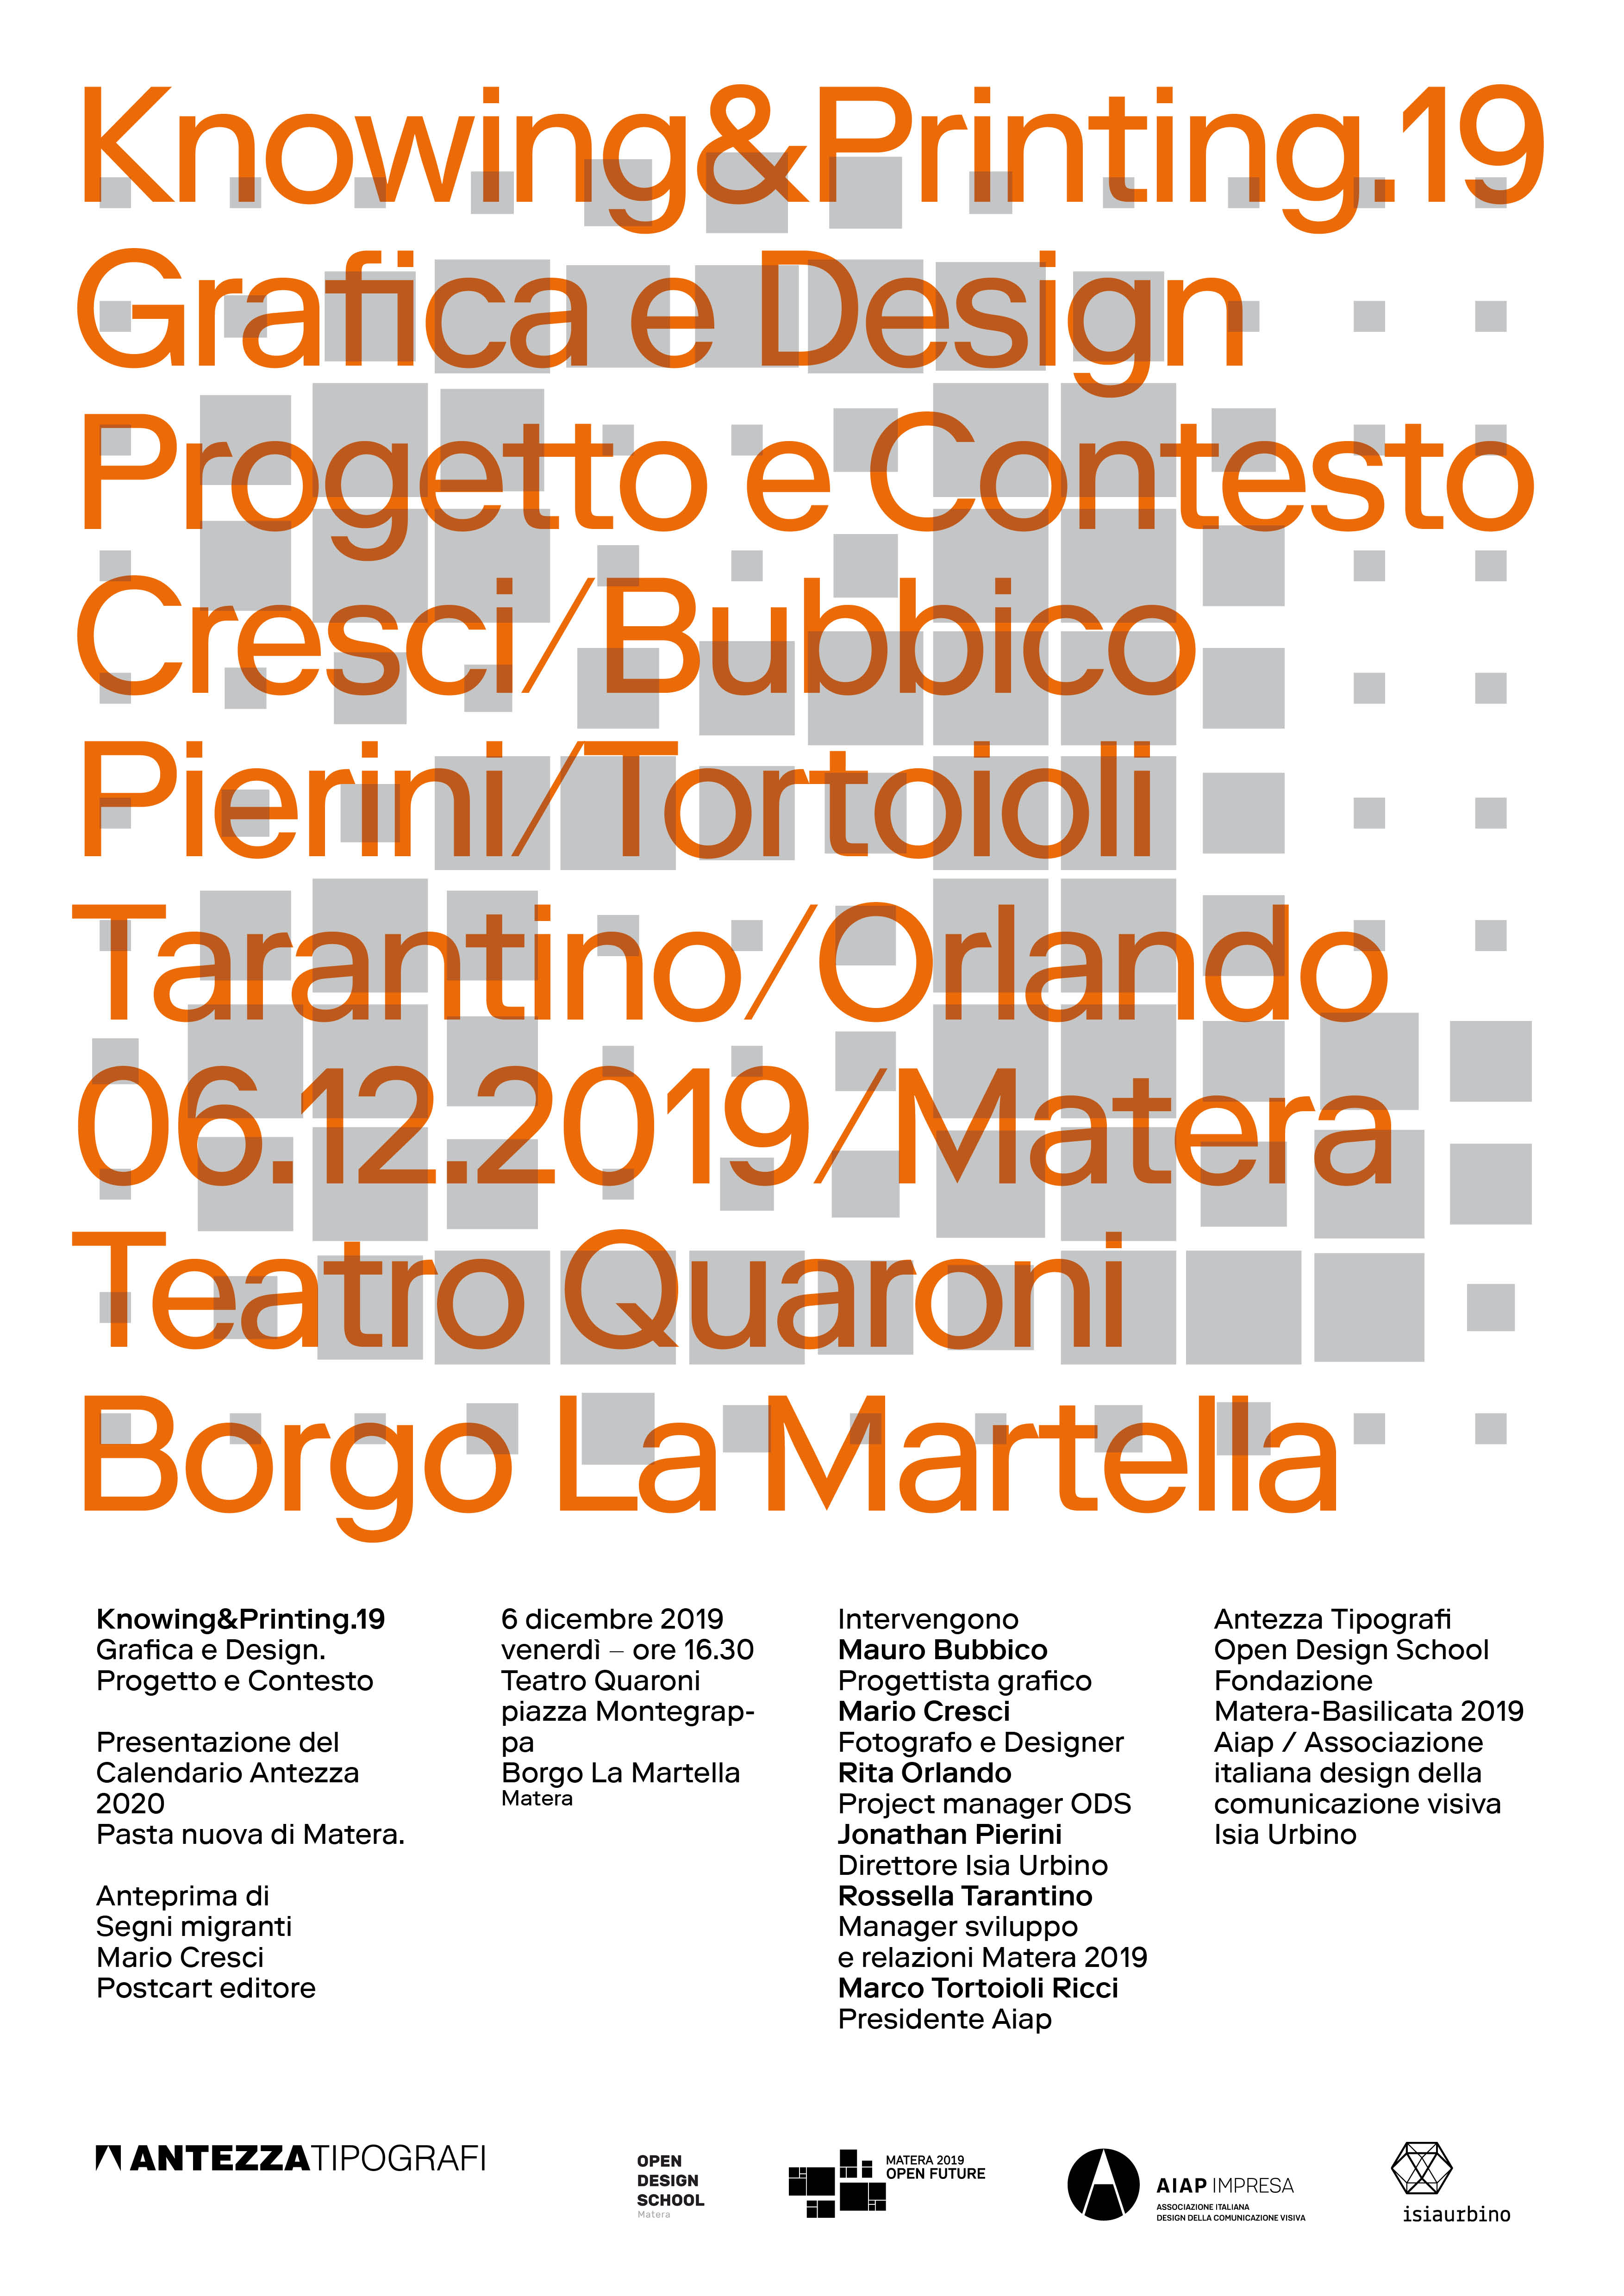 Il 6 a Matera workshop Knowing&Printing.19